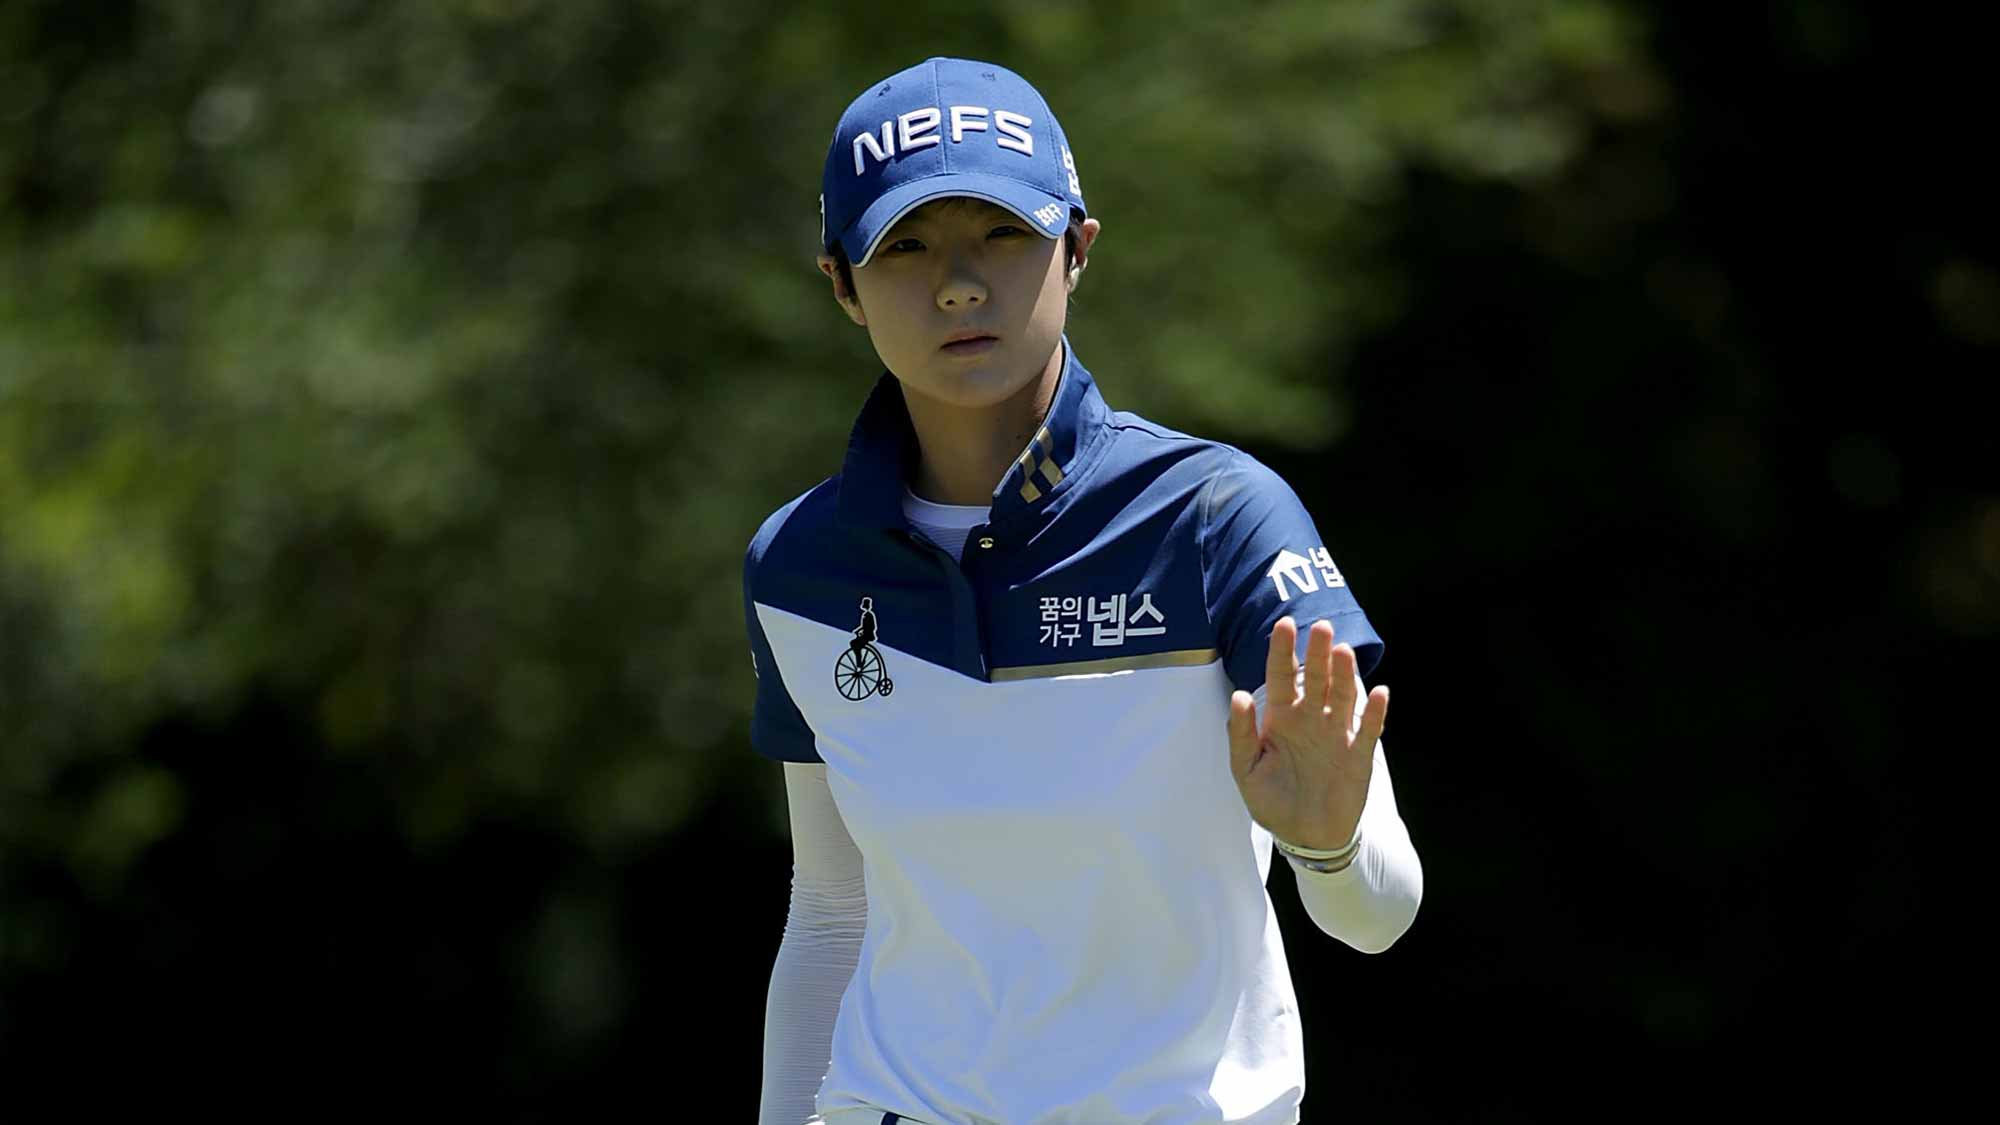 Sung Hyun Park during the third round of the U.S. Women's Open at the CordeValle Golf Club